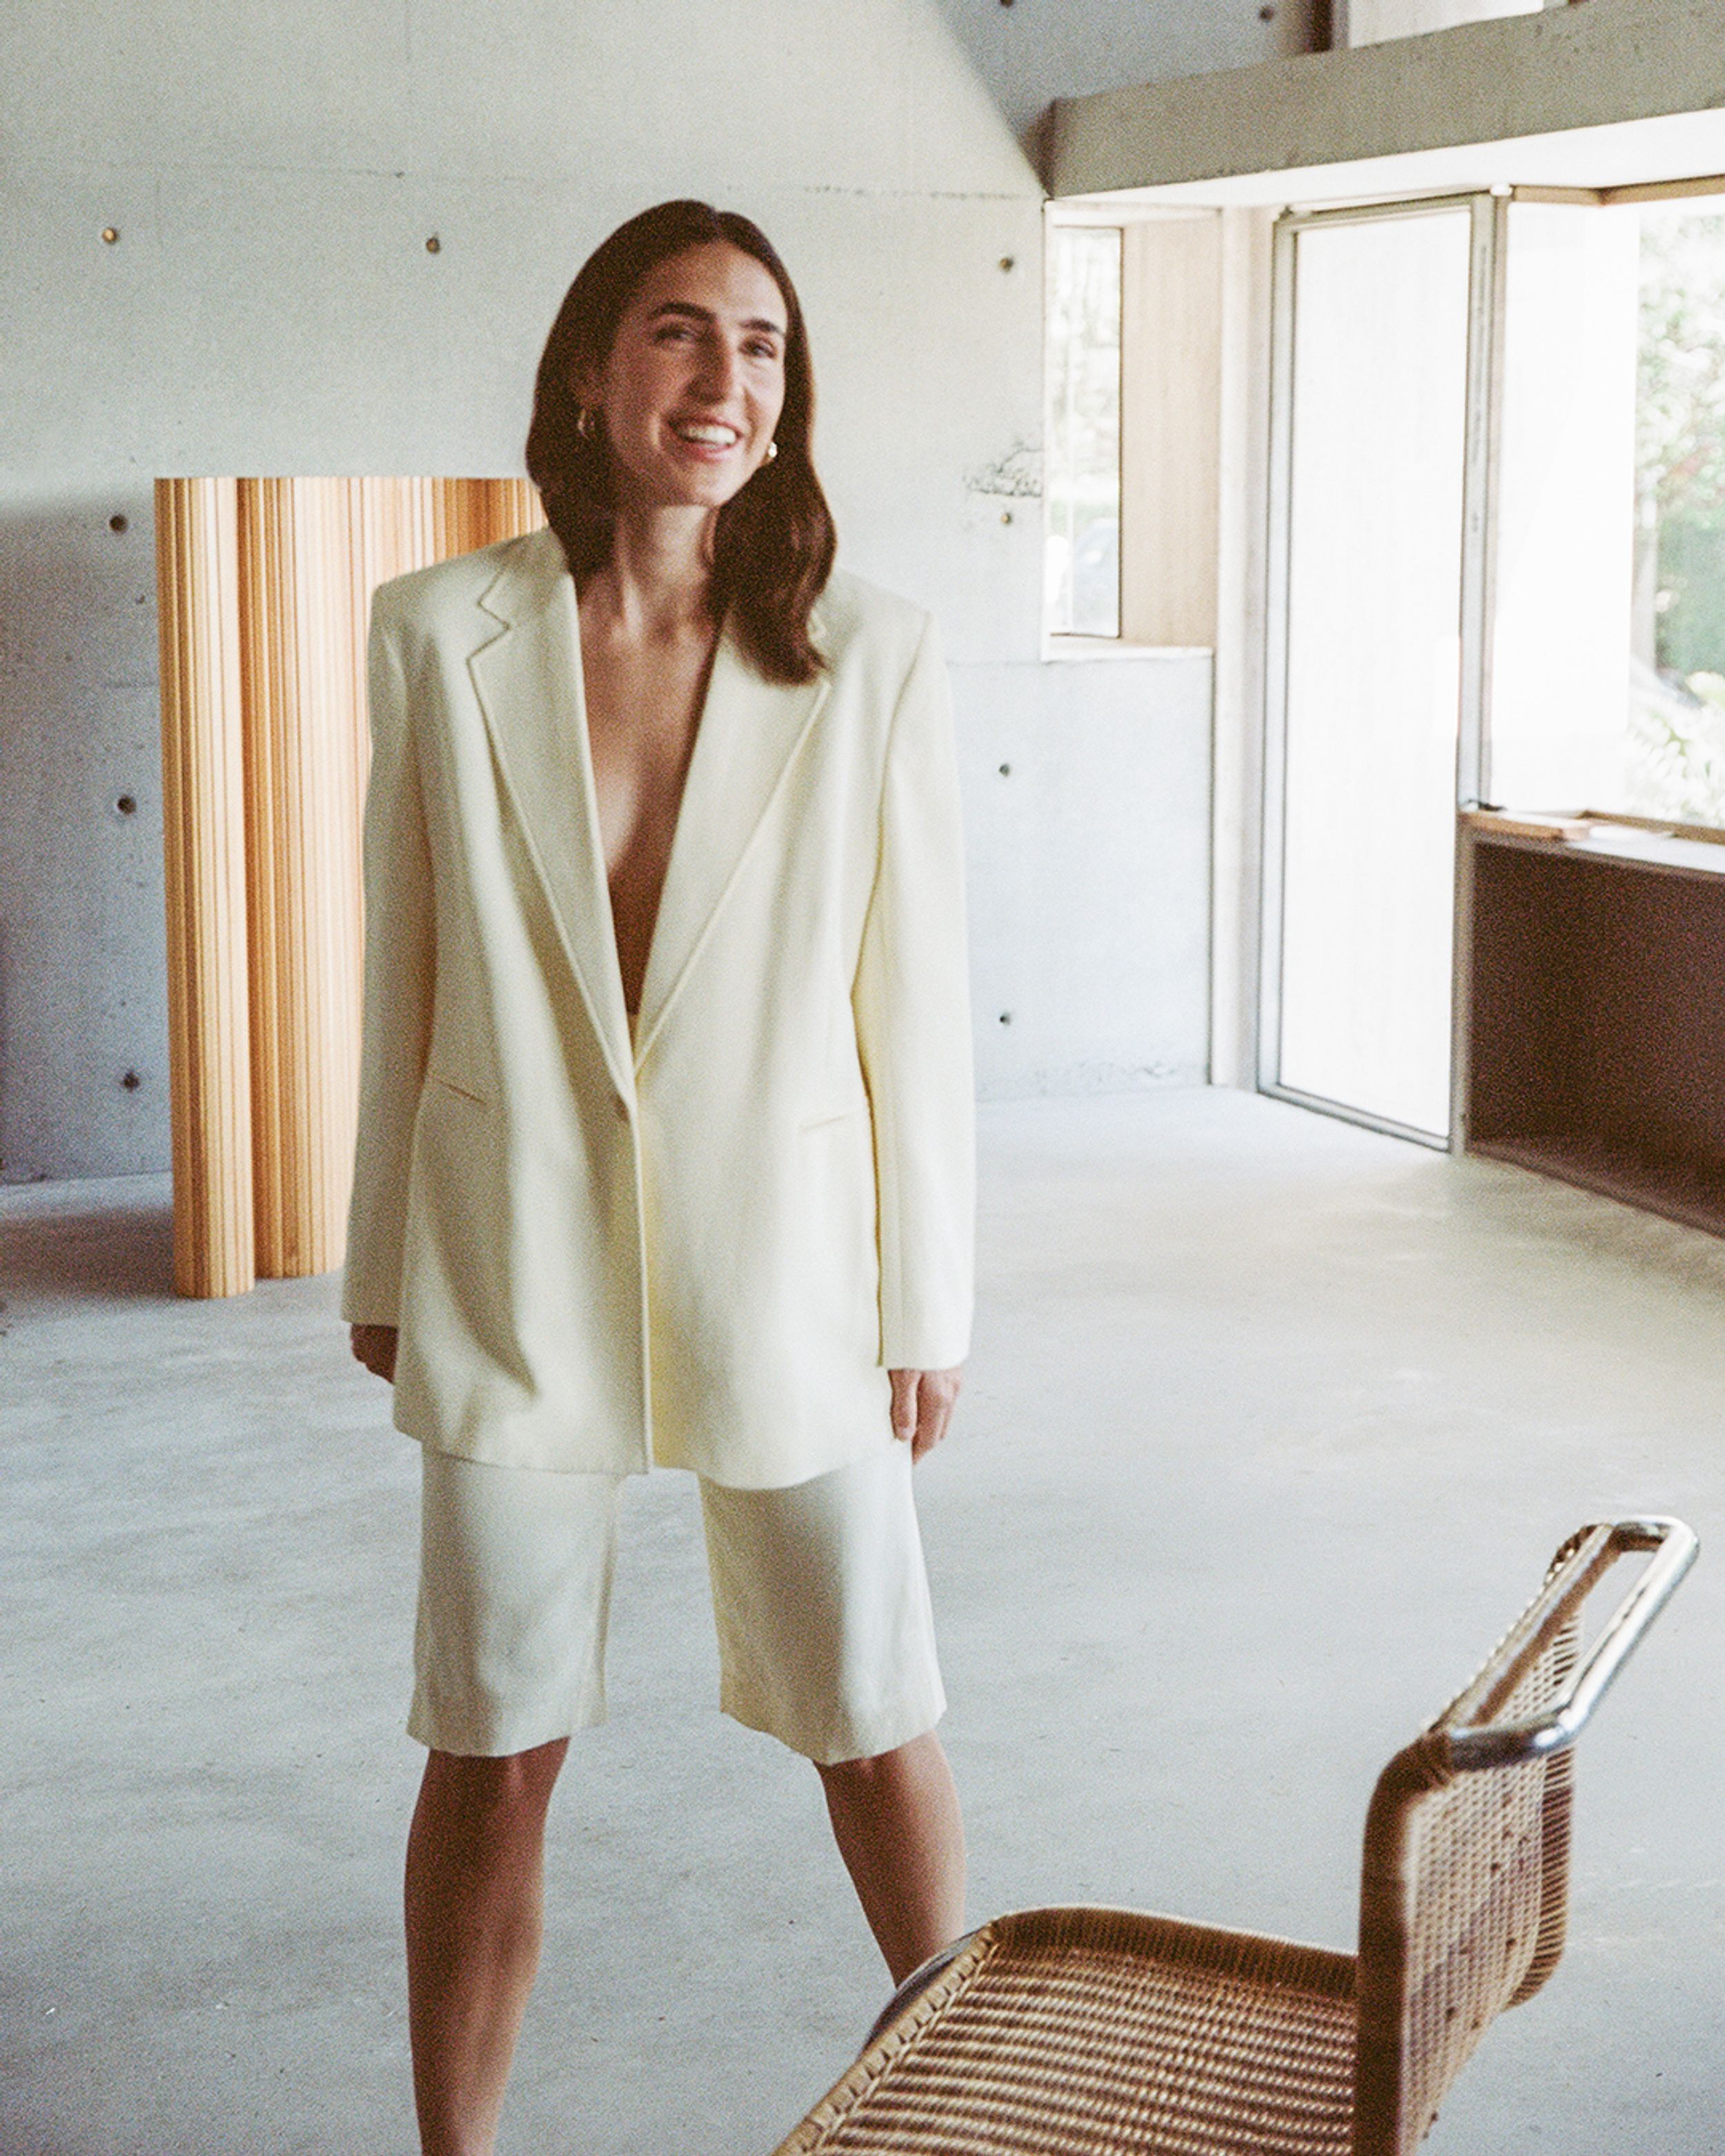 Bianca Marchi standing in a minimalistic living room wearing a cream oversized jacket and cream shorts